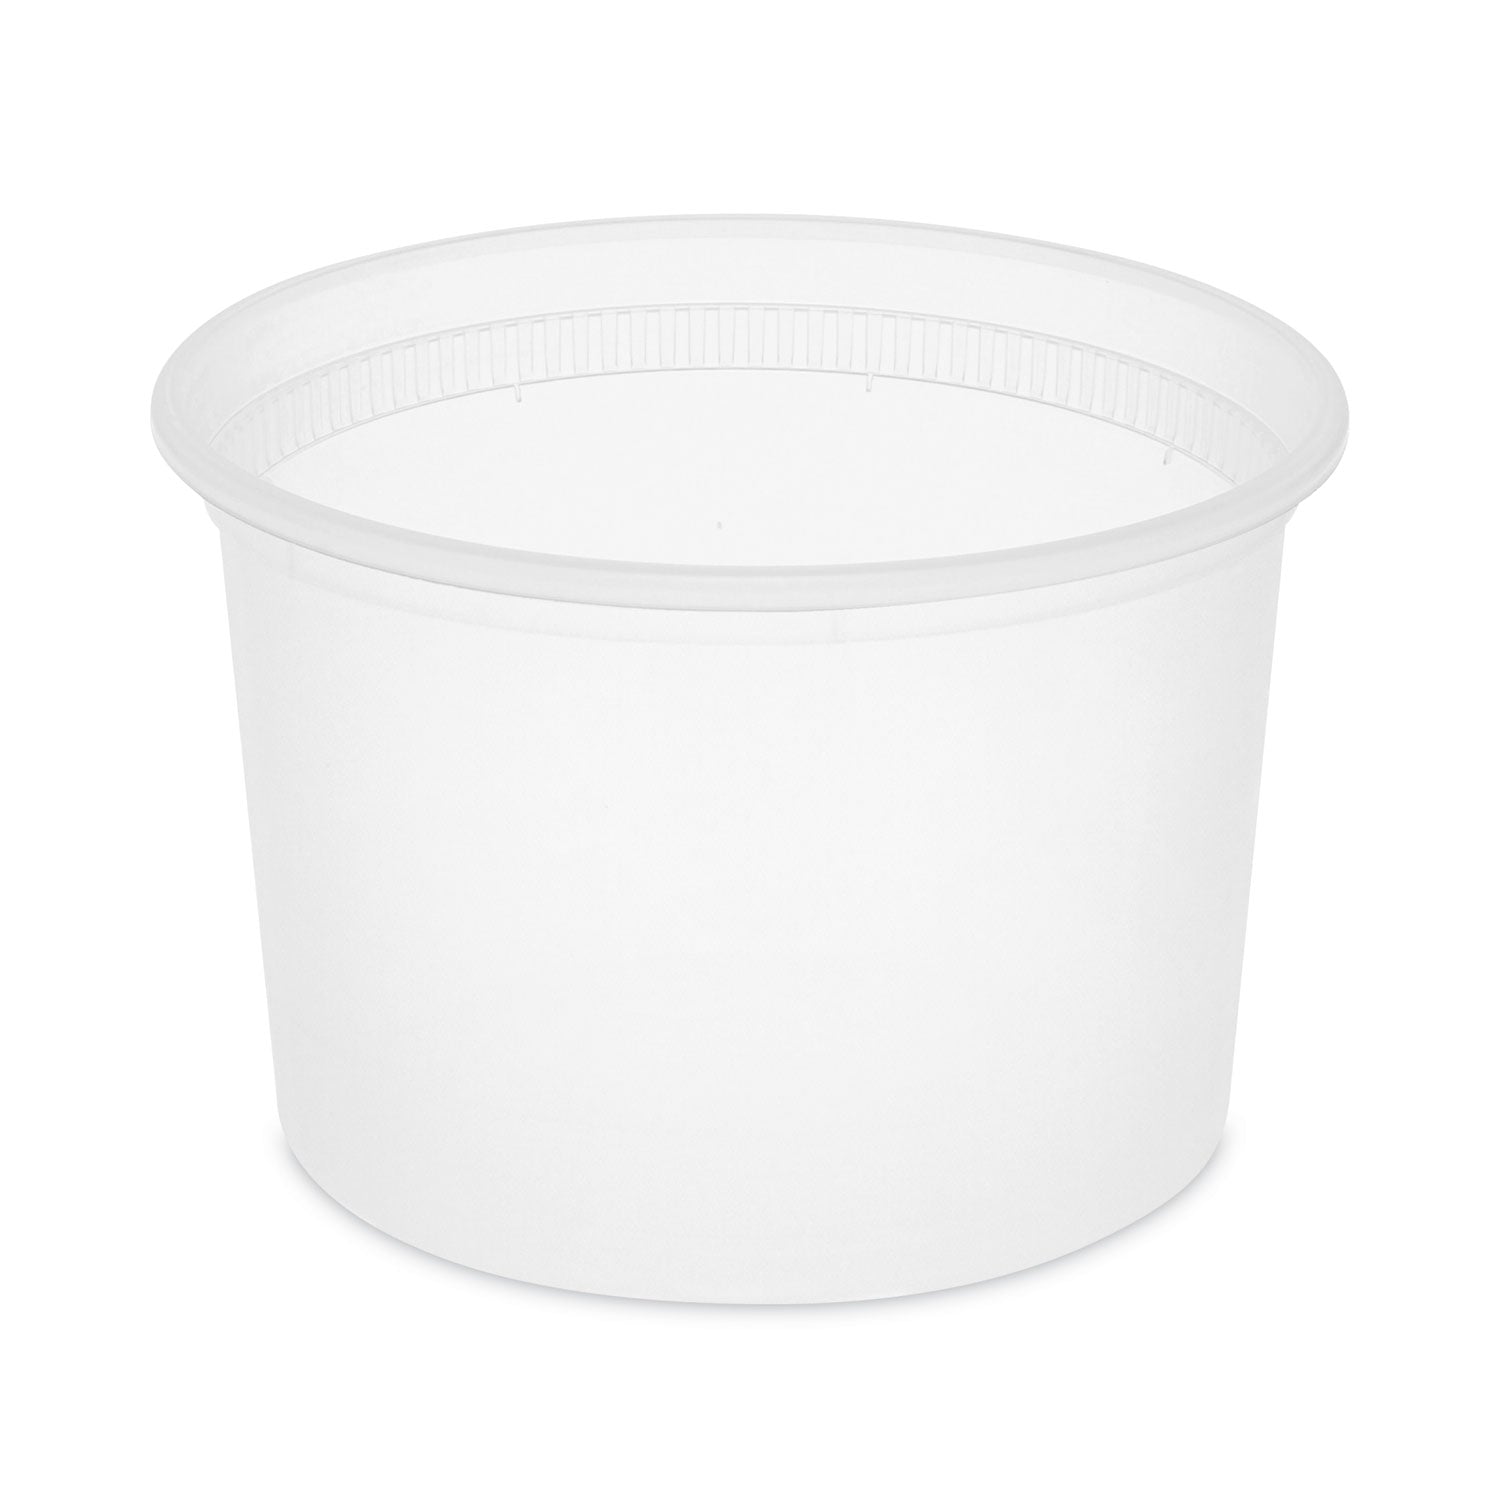 newspring-delitainer-microwavable-container-64-oz-45-x-45-x-635-natural-plastic-120-carton_pctl6064 - 1